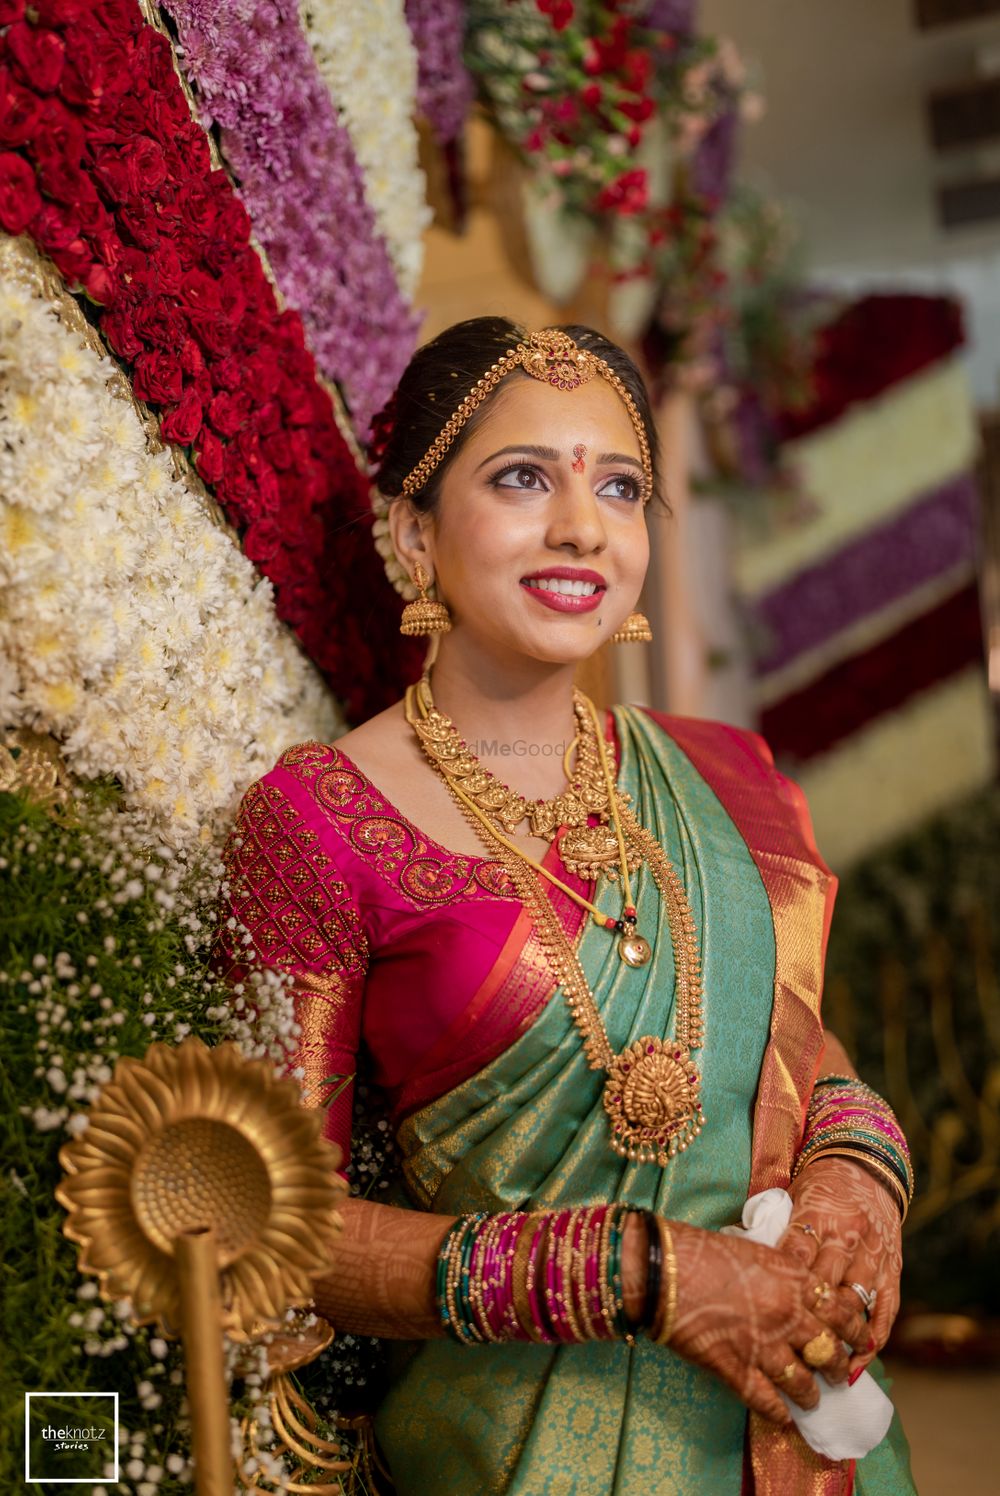 Photo of South Indian bride wearing a green and pink saree with temple jewellery.